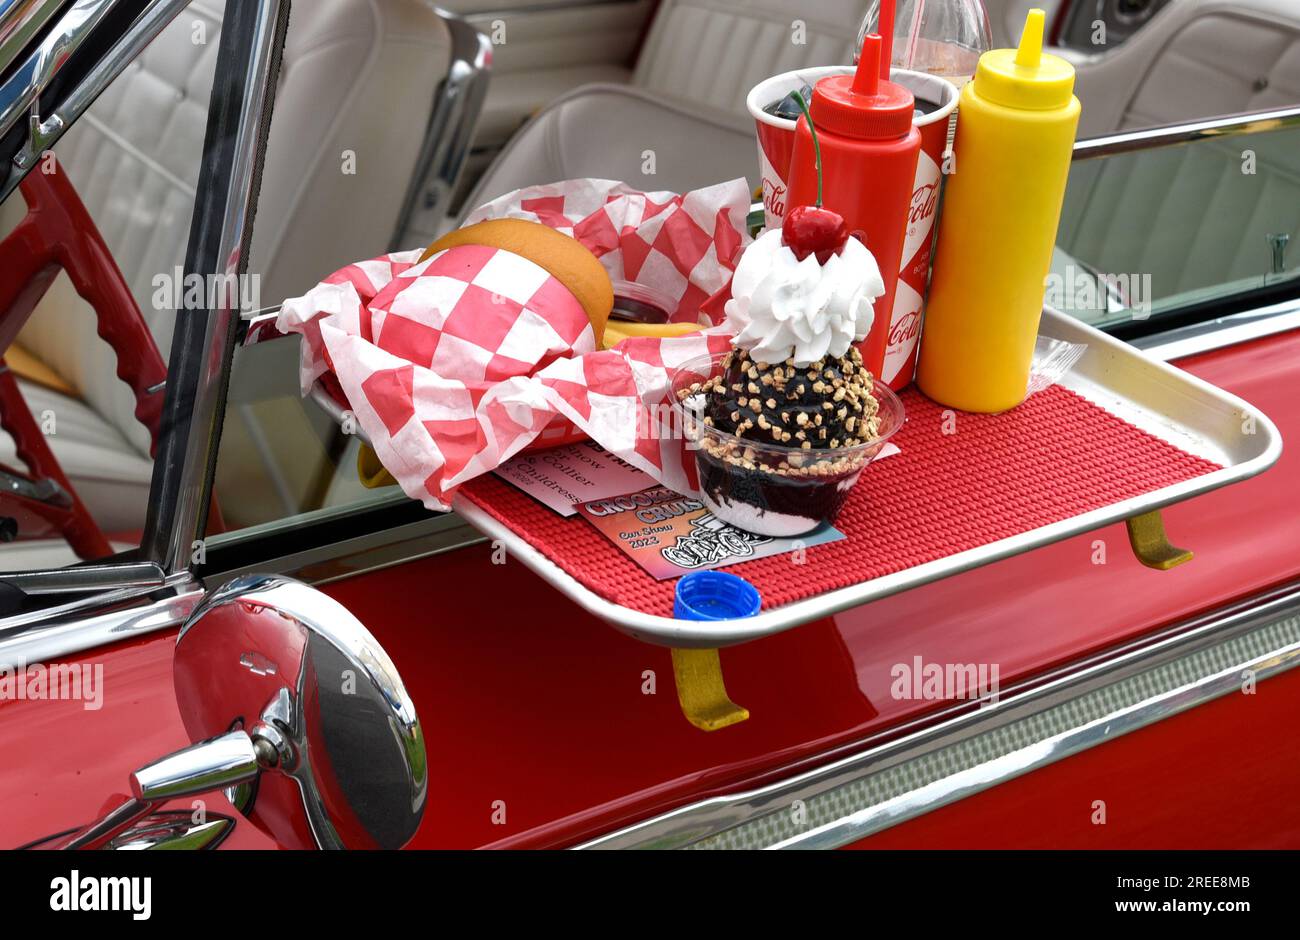 A 1950s Chevrolet convertible on display at a car show features a drive-in restaurant window tray with fast food and drinks. Stock Photo